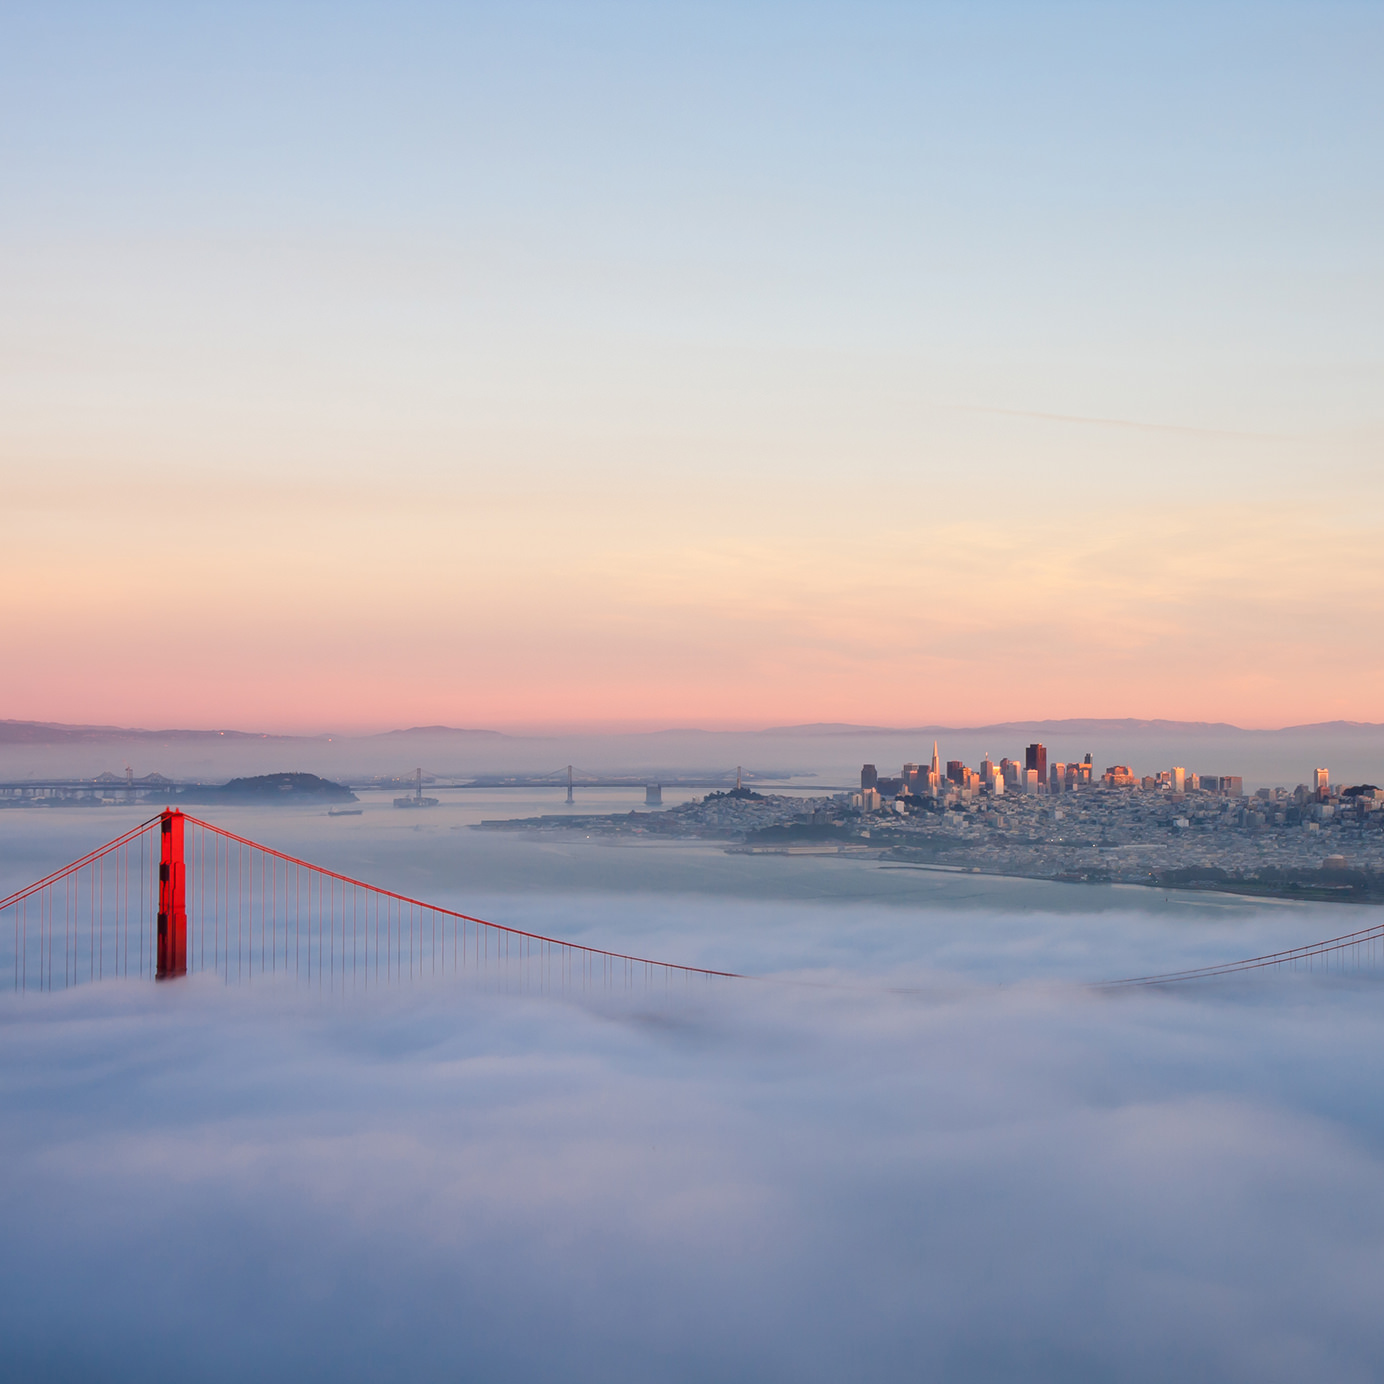 To Capture the Terroir of San Francisco, One Distiller Is Making Vodka With Fog